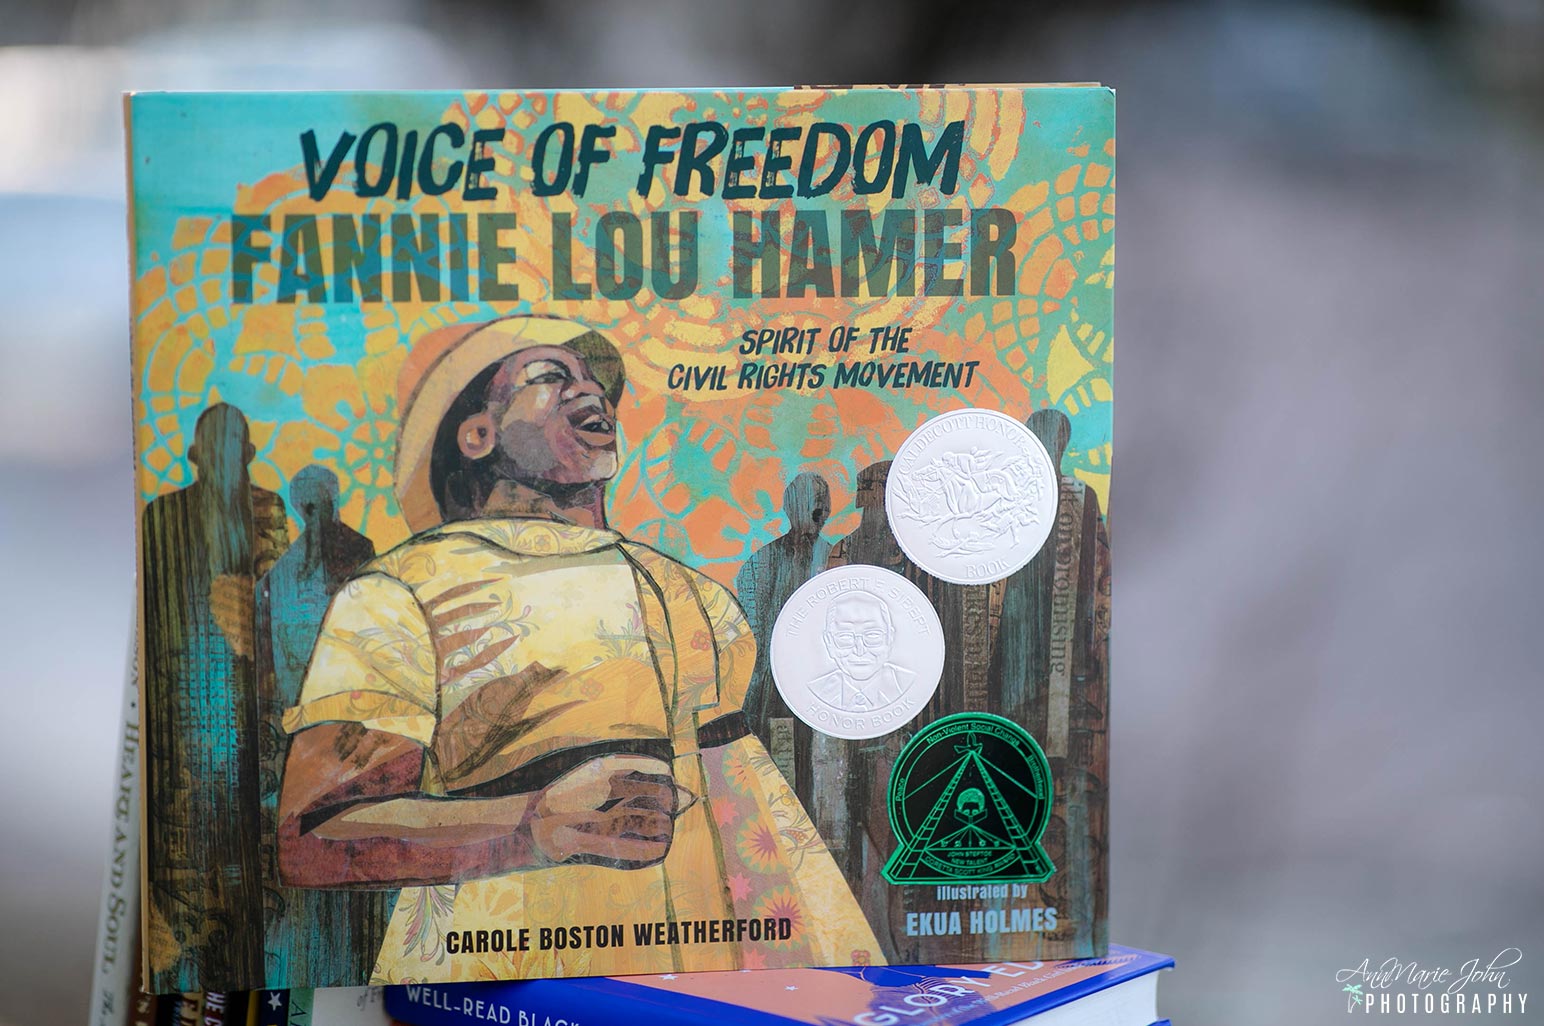 Voice of Freedom Fannie Lou Hamer